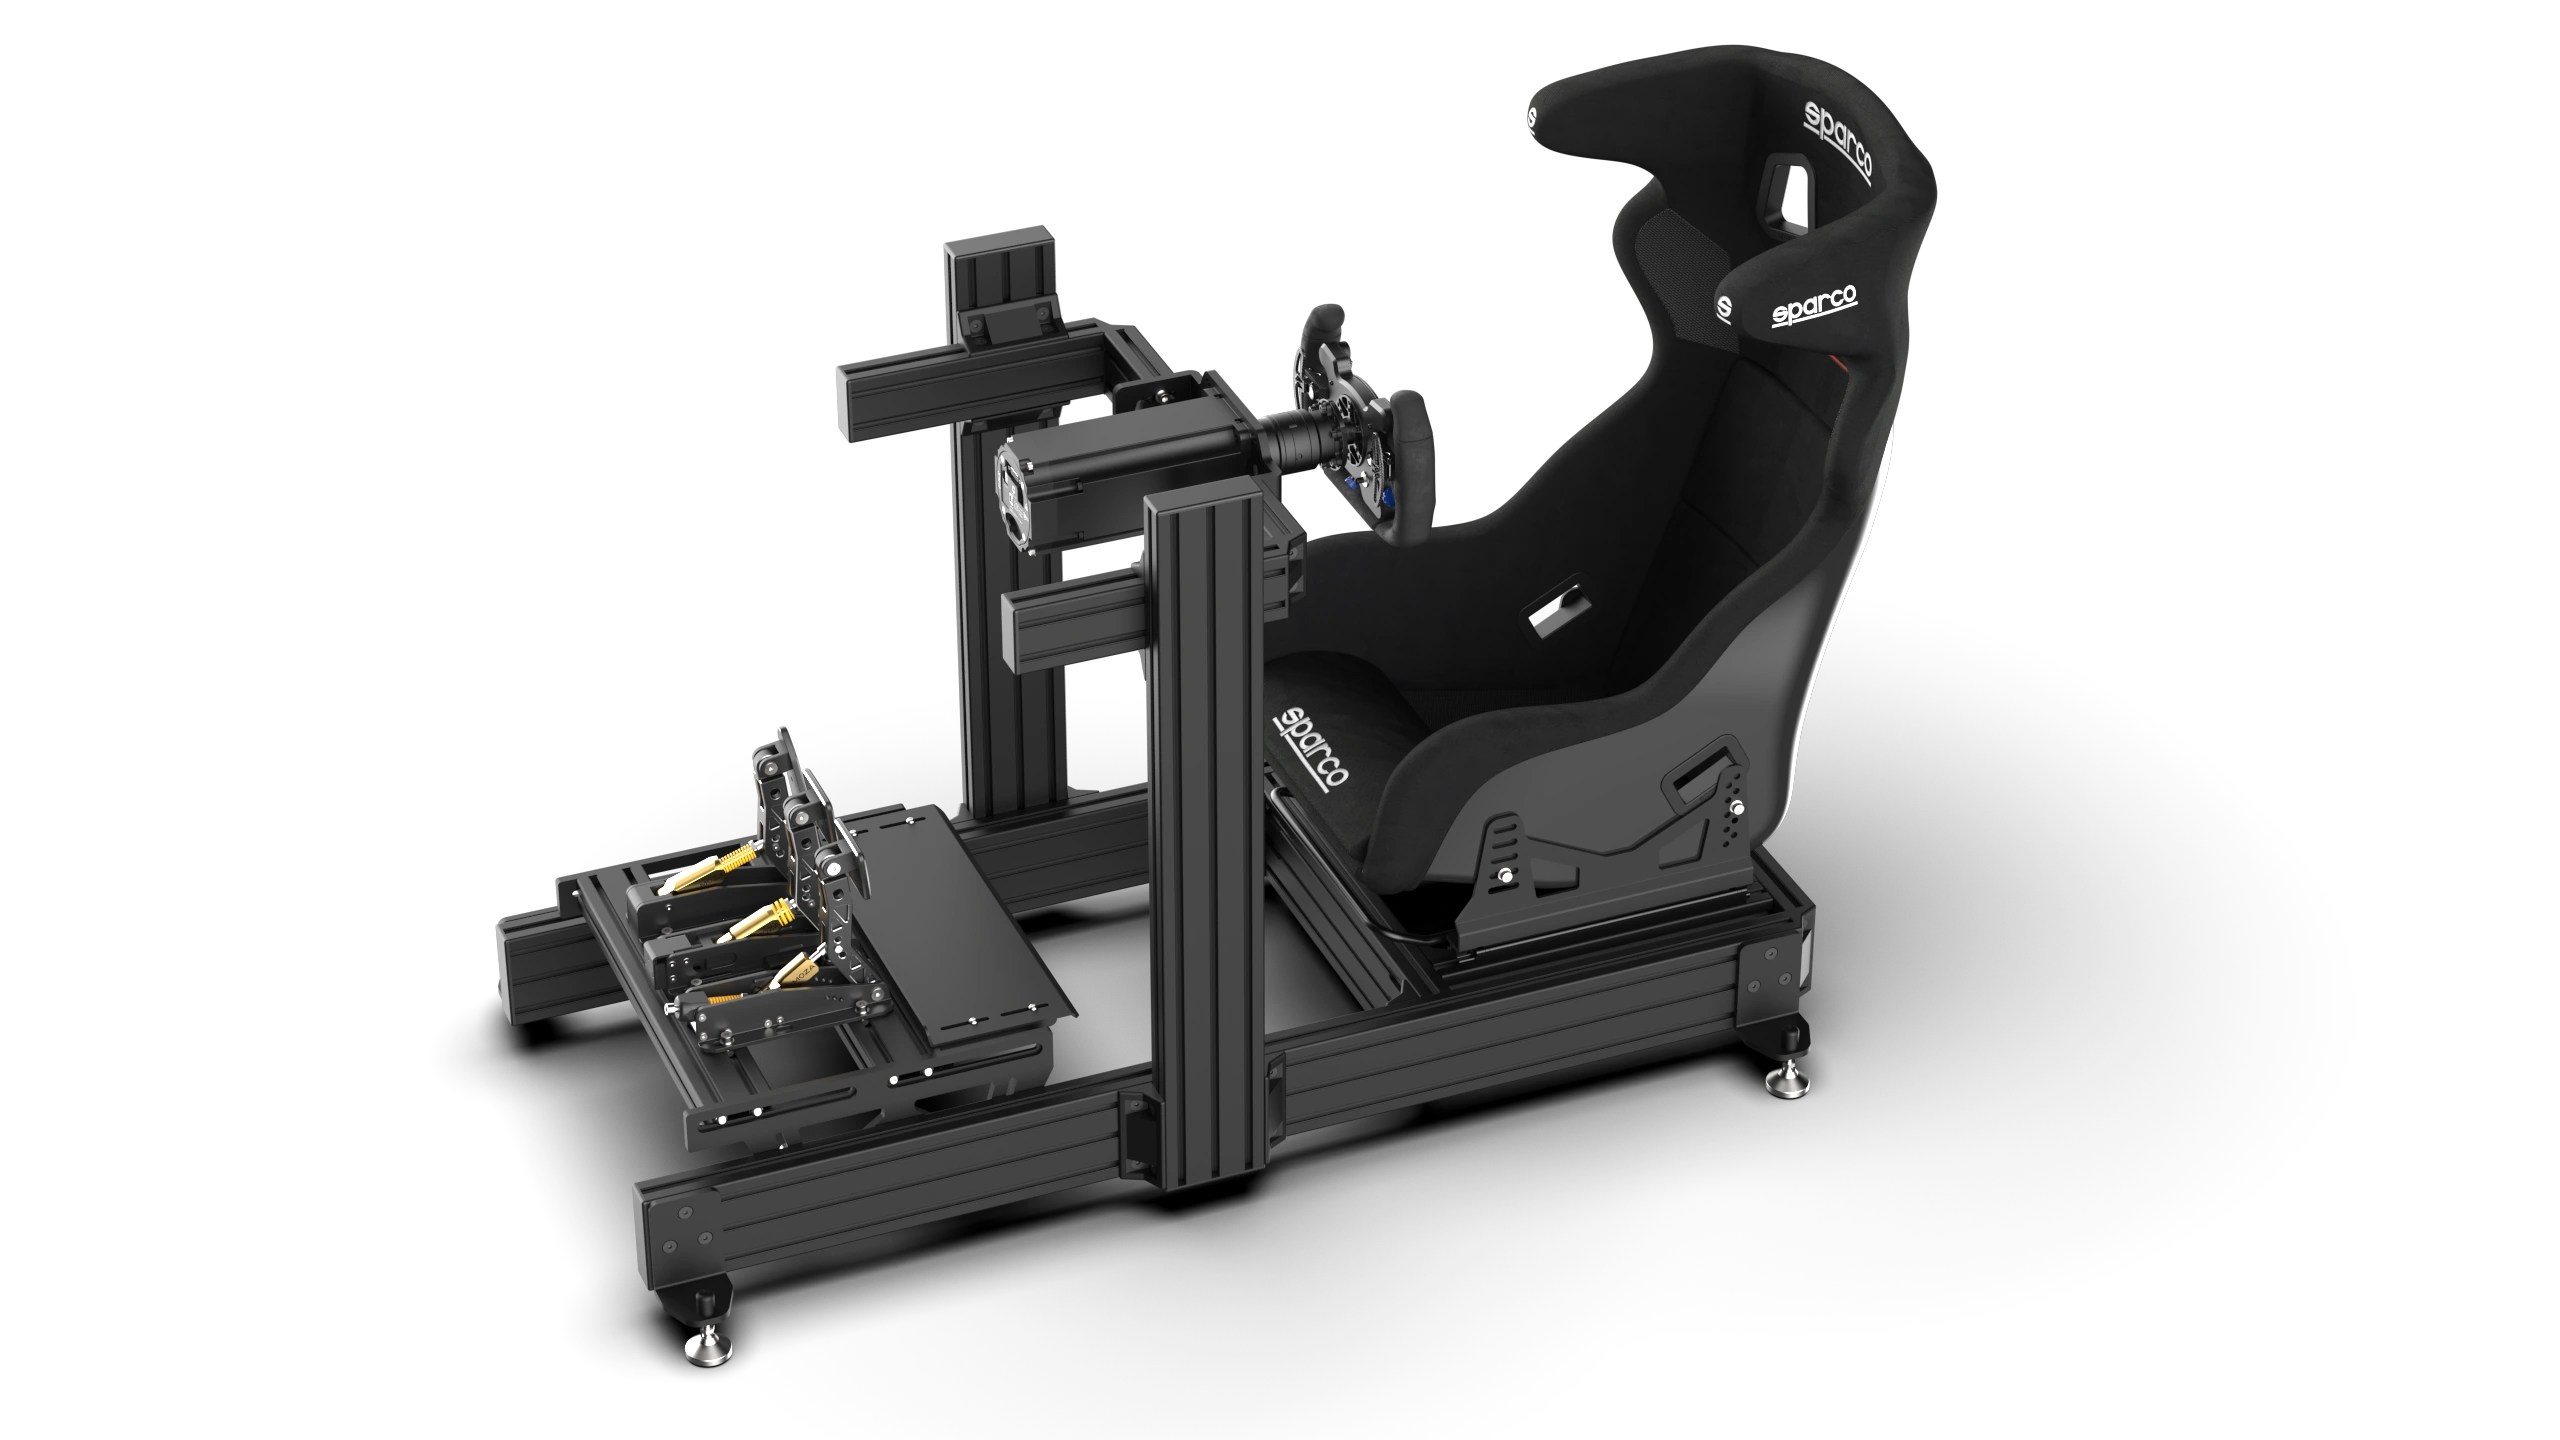 rseat-a1-120-gt-006-v2